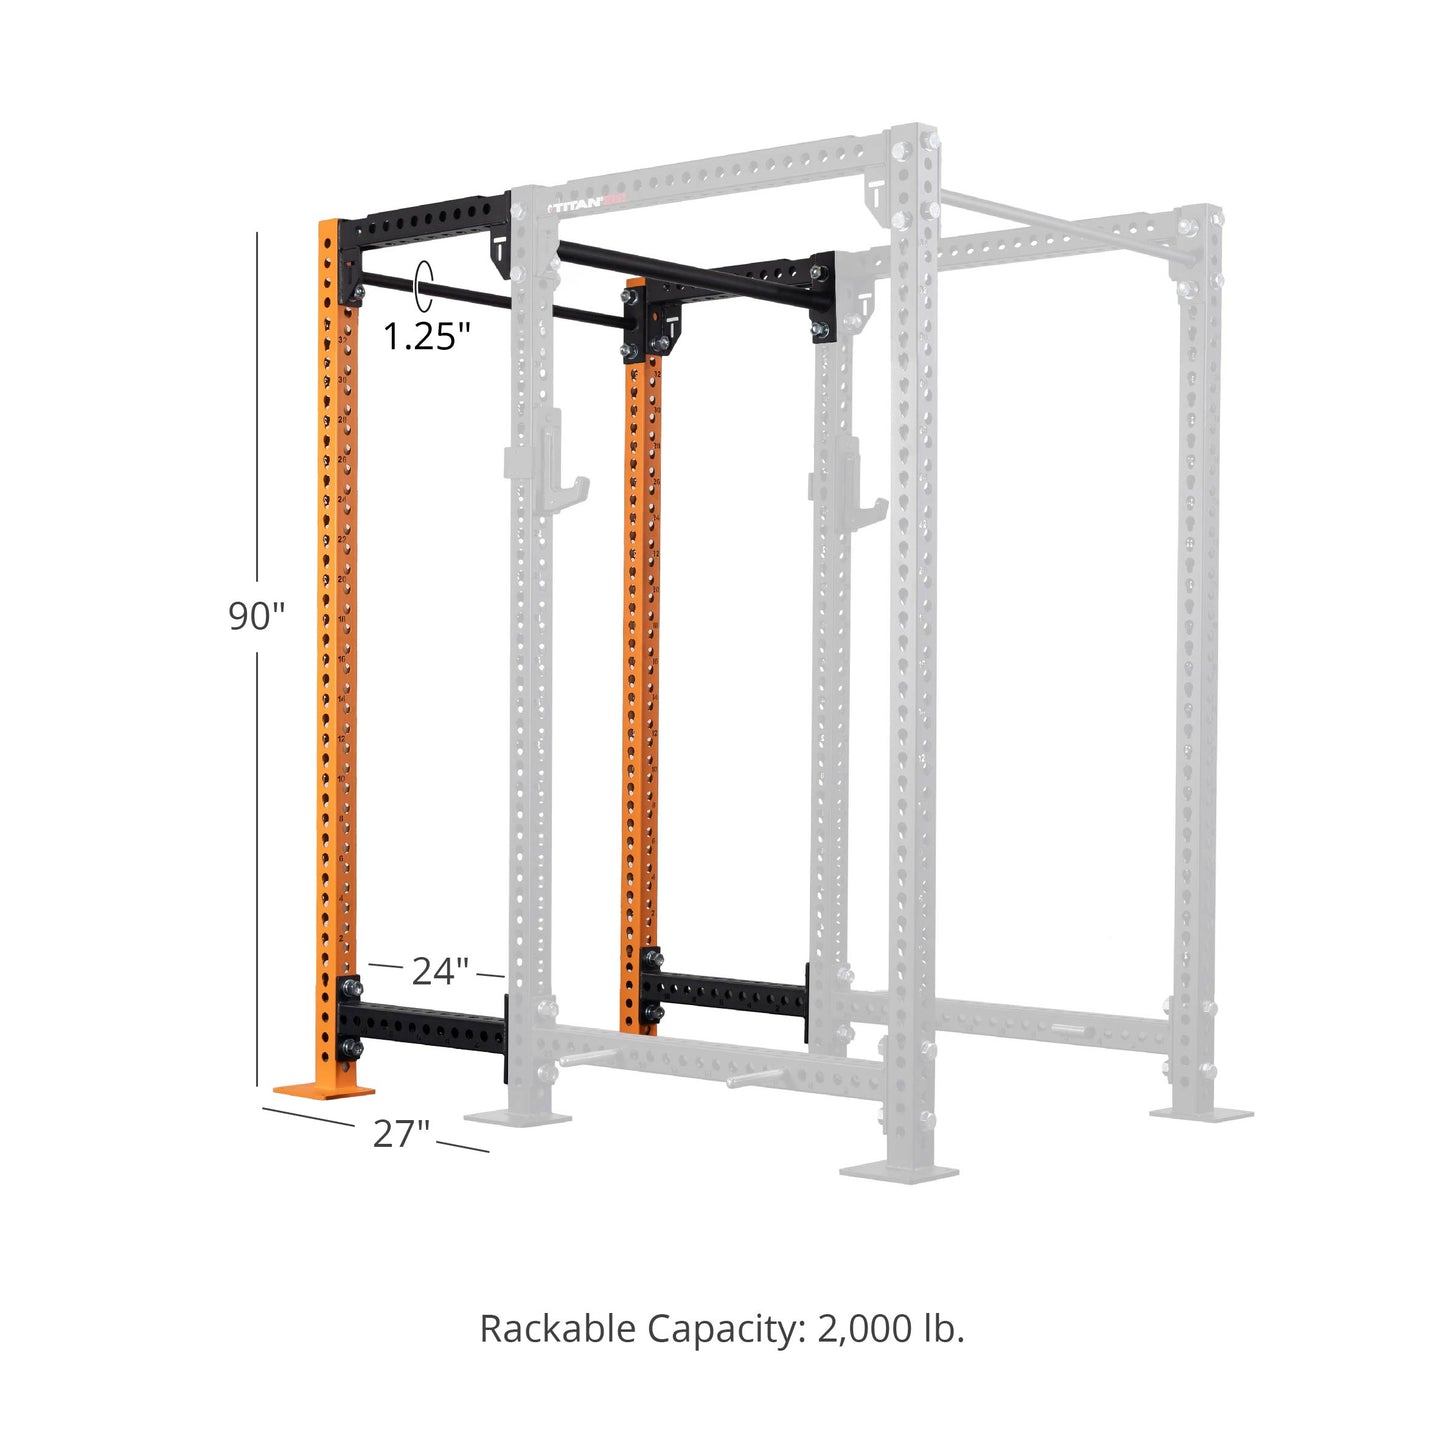 TITAN Series 24" Extension Kit - Extension Color: Orange - Extension Height: 90" - Crossmember: 1.25" Pull-Up Bar | Orange / 90" / 1.25" Pull-Up Bar - view 89